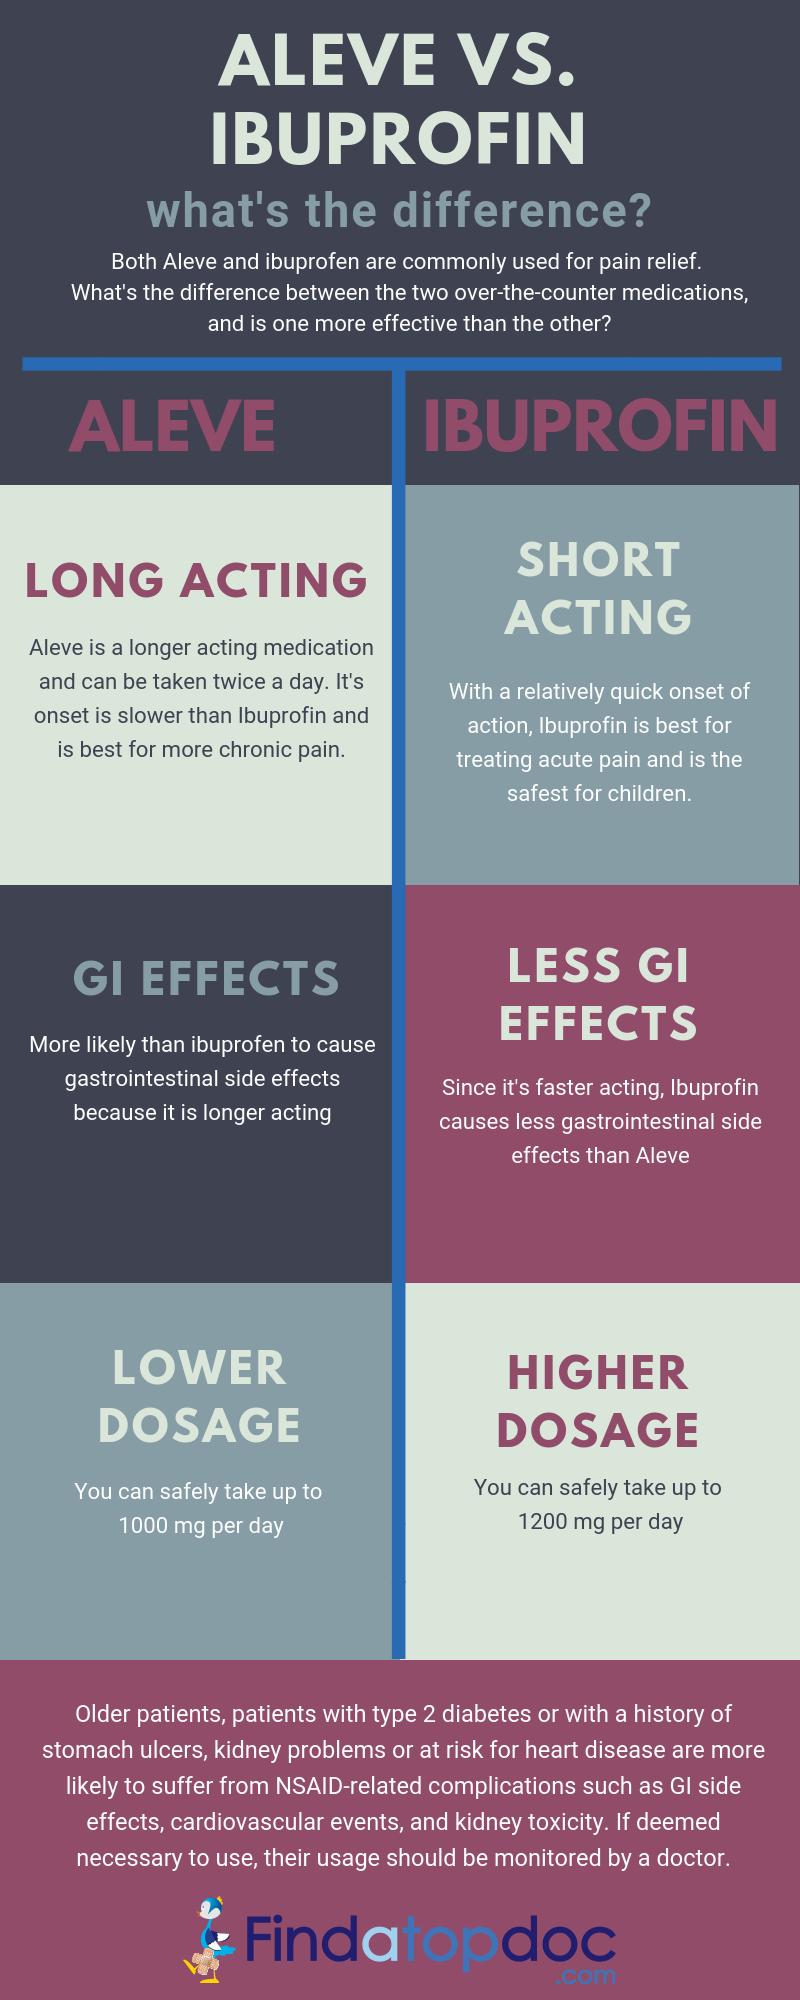 A table comparing the over-the-counter pain relievers Aleve and Ibuprofen, showing differences in how long they take to act, their side effects, and their dosage.